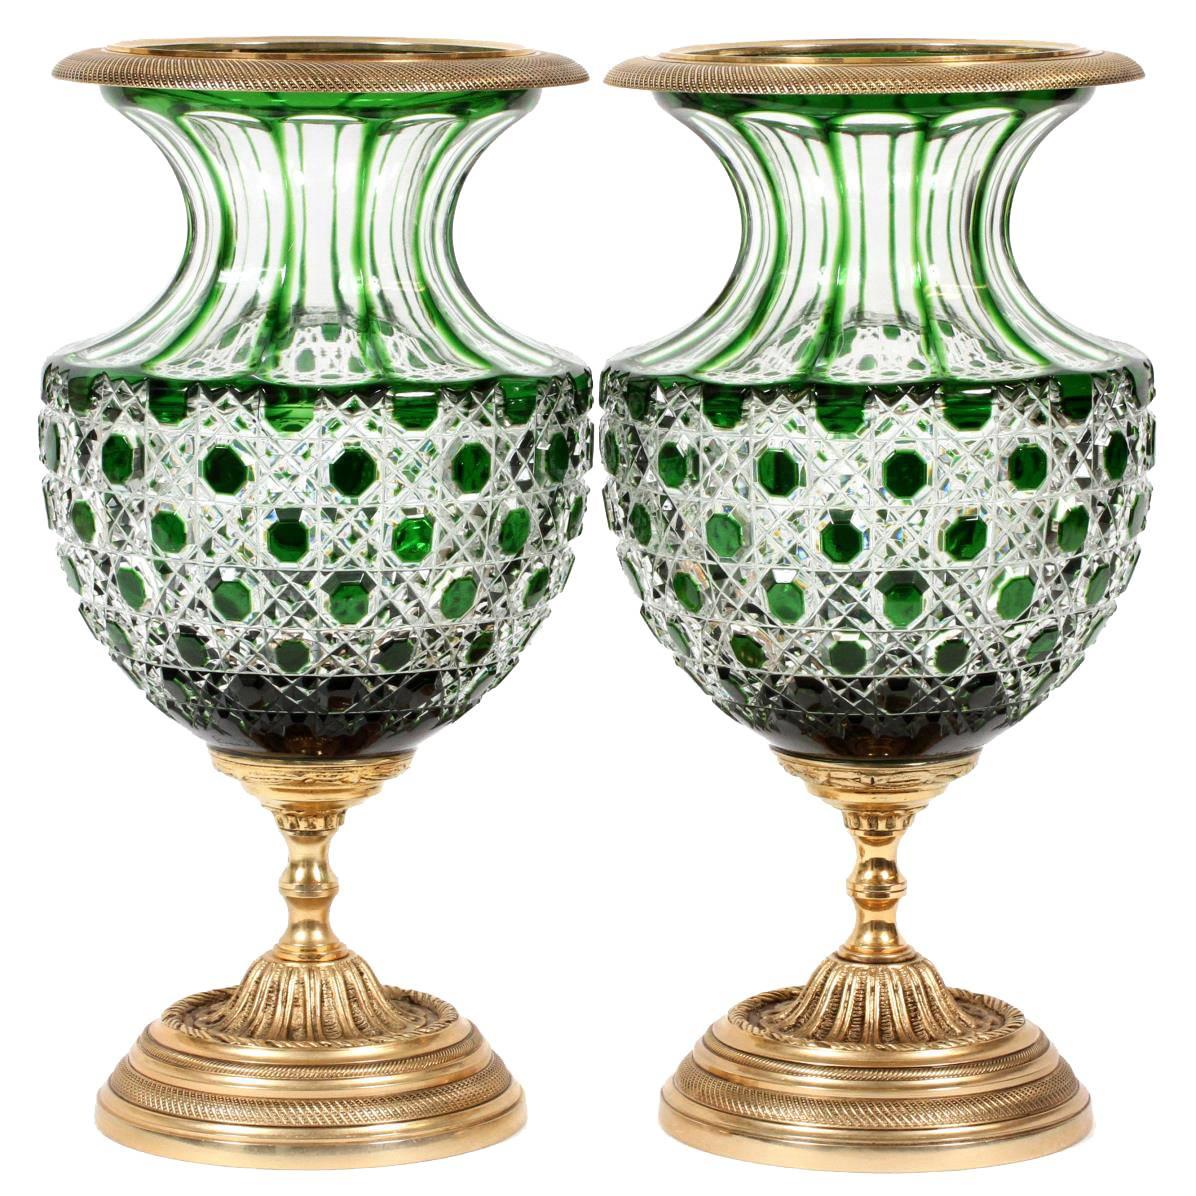 Exquisite Pair of Rare Beautiful Empire Green Crystal Baccarat Style Vases Urn For Sale